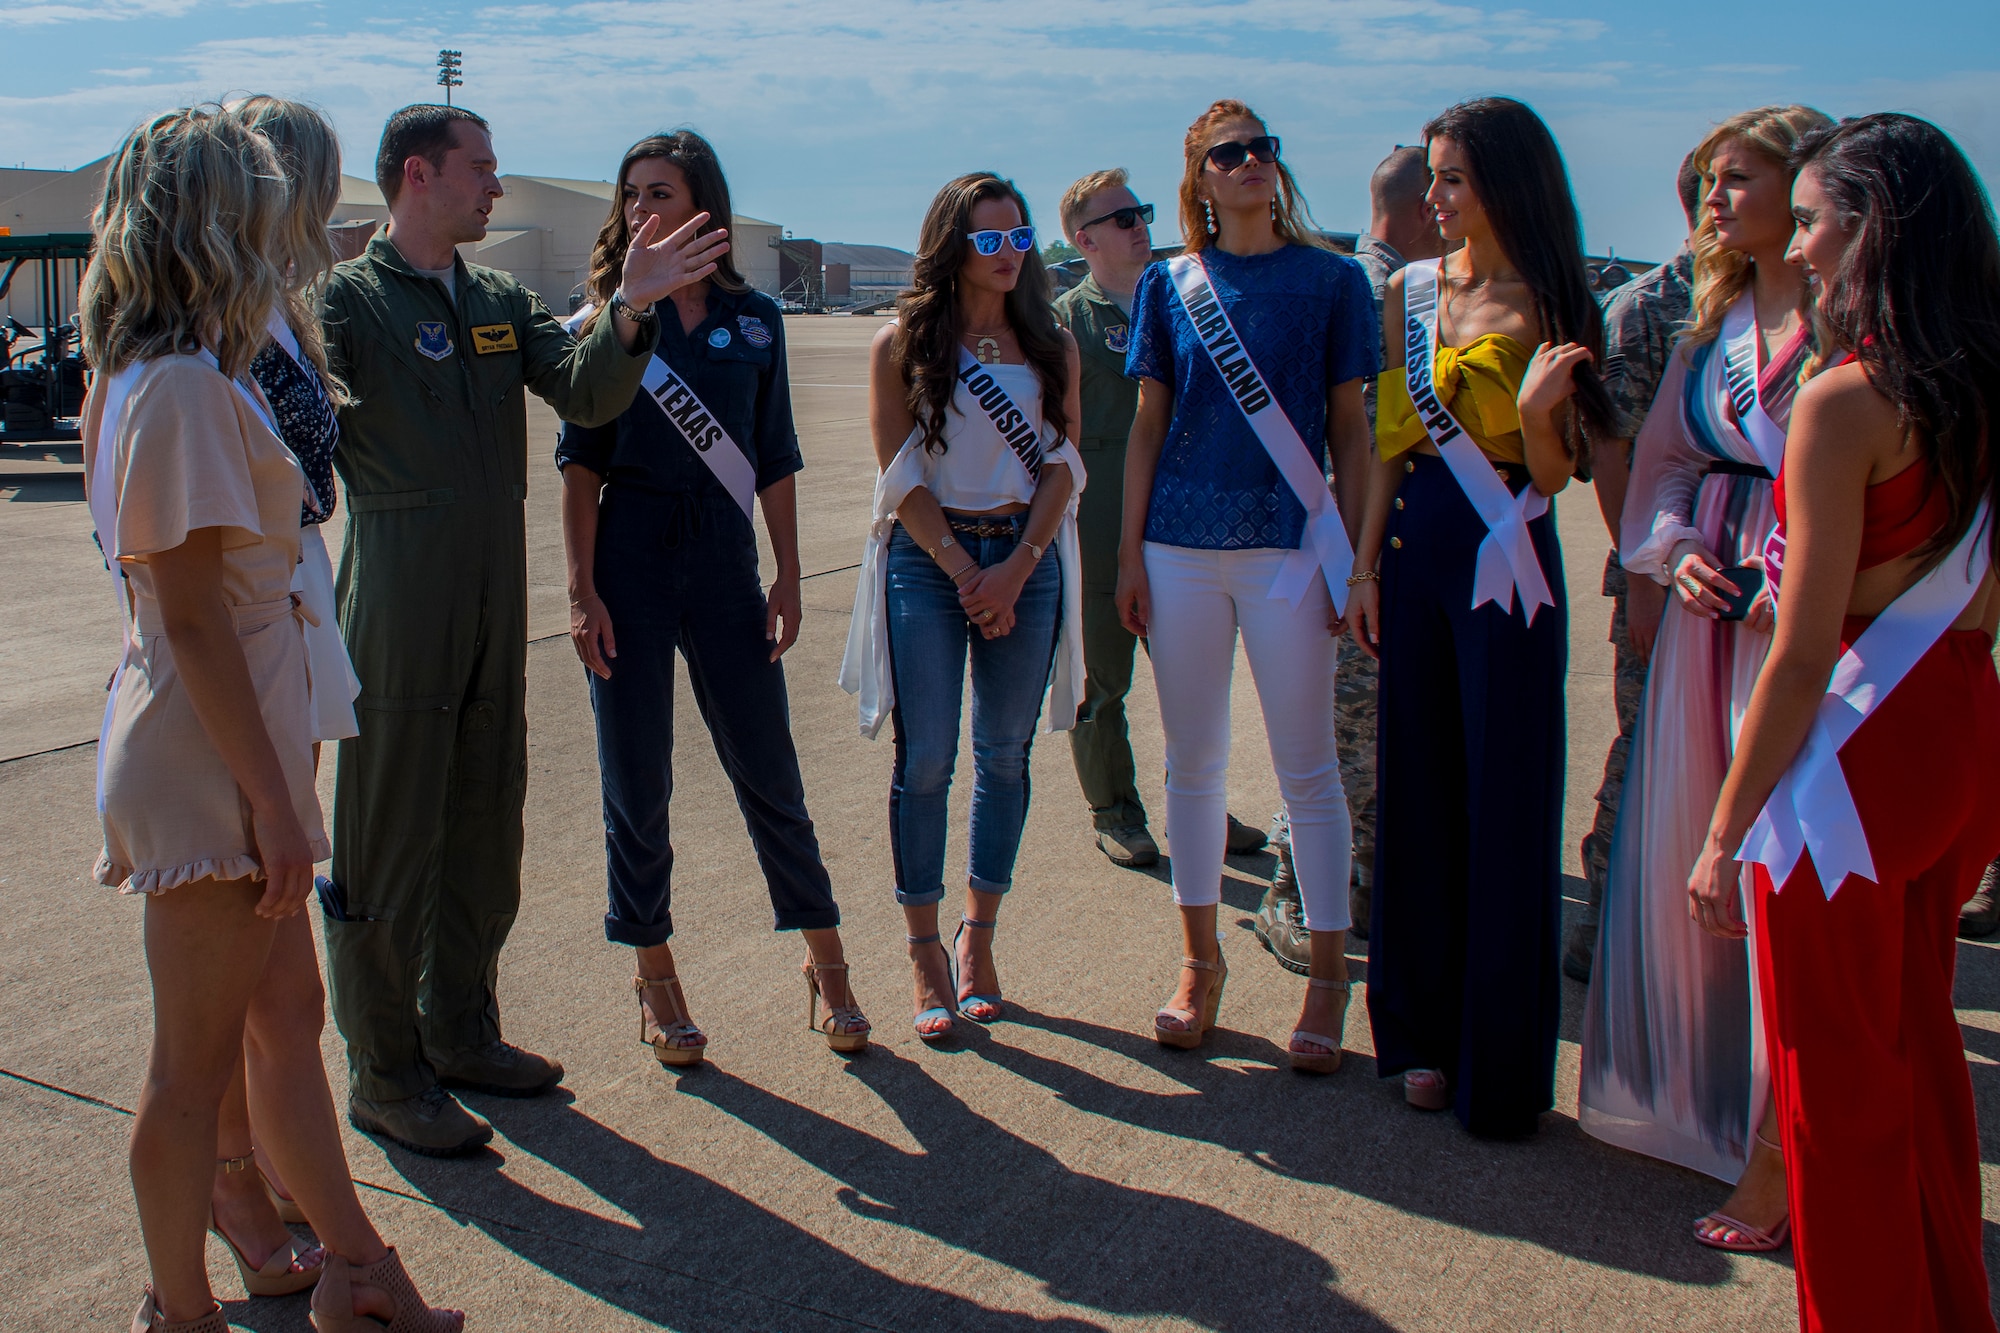 U.S. Air Force Capt. Bryan Freeman, 11th Bomb Squadron pilot, tells contestants in the 2018 Miss USA pageant about the B-52 Stratofortress during their visit to Barksdale Air Force Base, Louisiana, May 15, 2018.